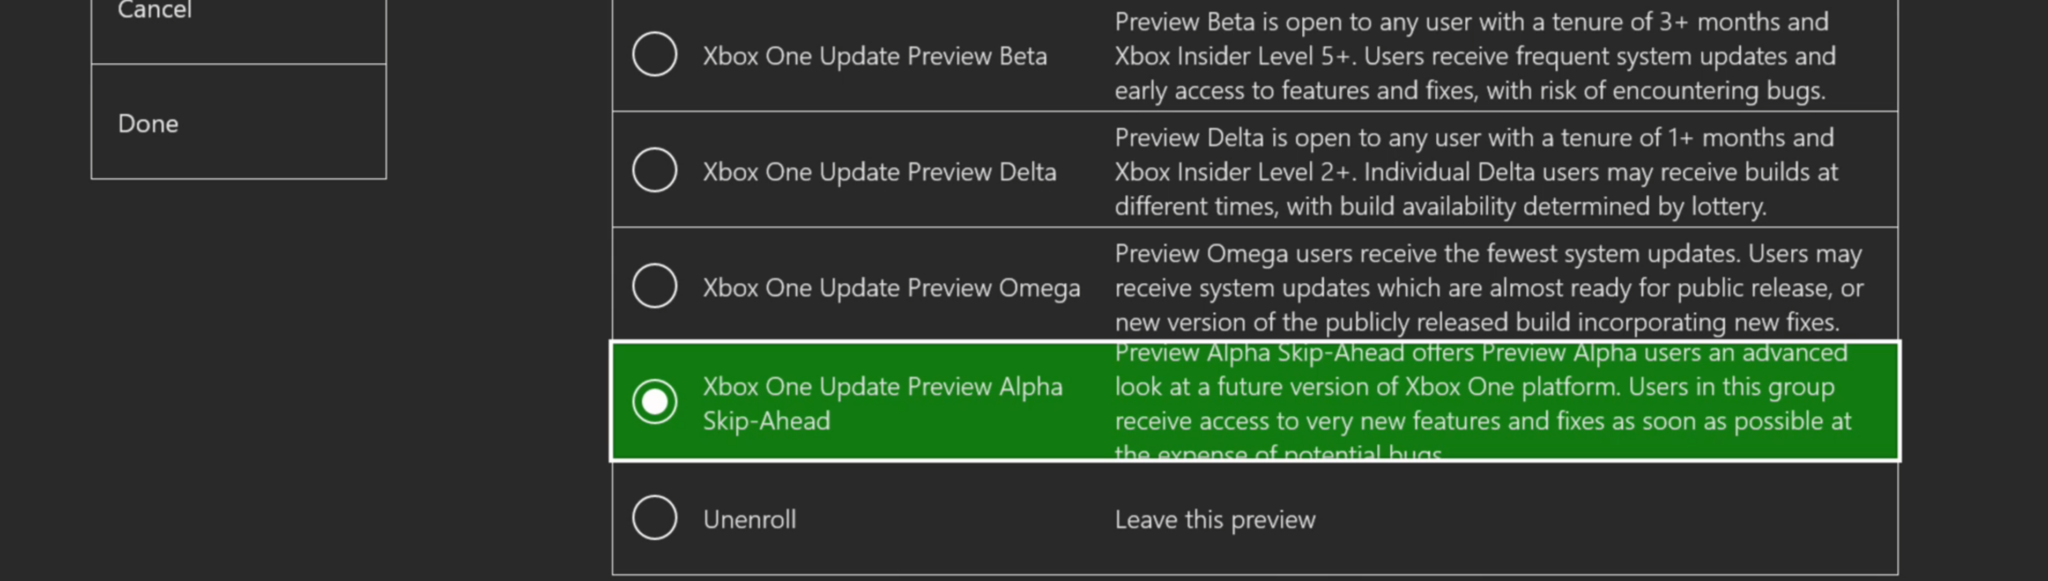 Xbox One Update Preview: Try Out Even Earlier Builds with the New “Alpha – Skip Ahead” Ring, Coming Soon